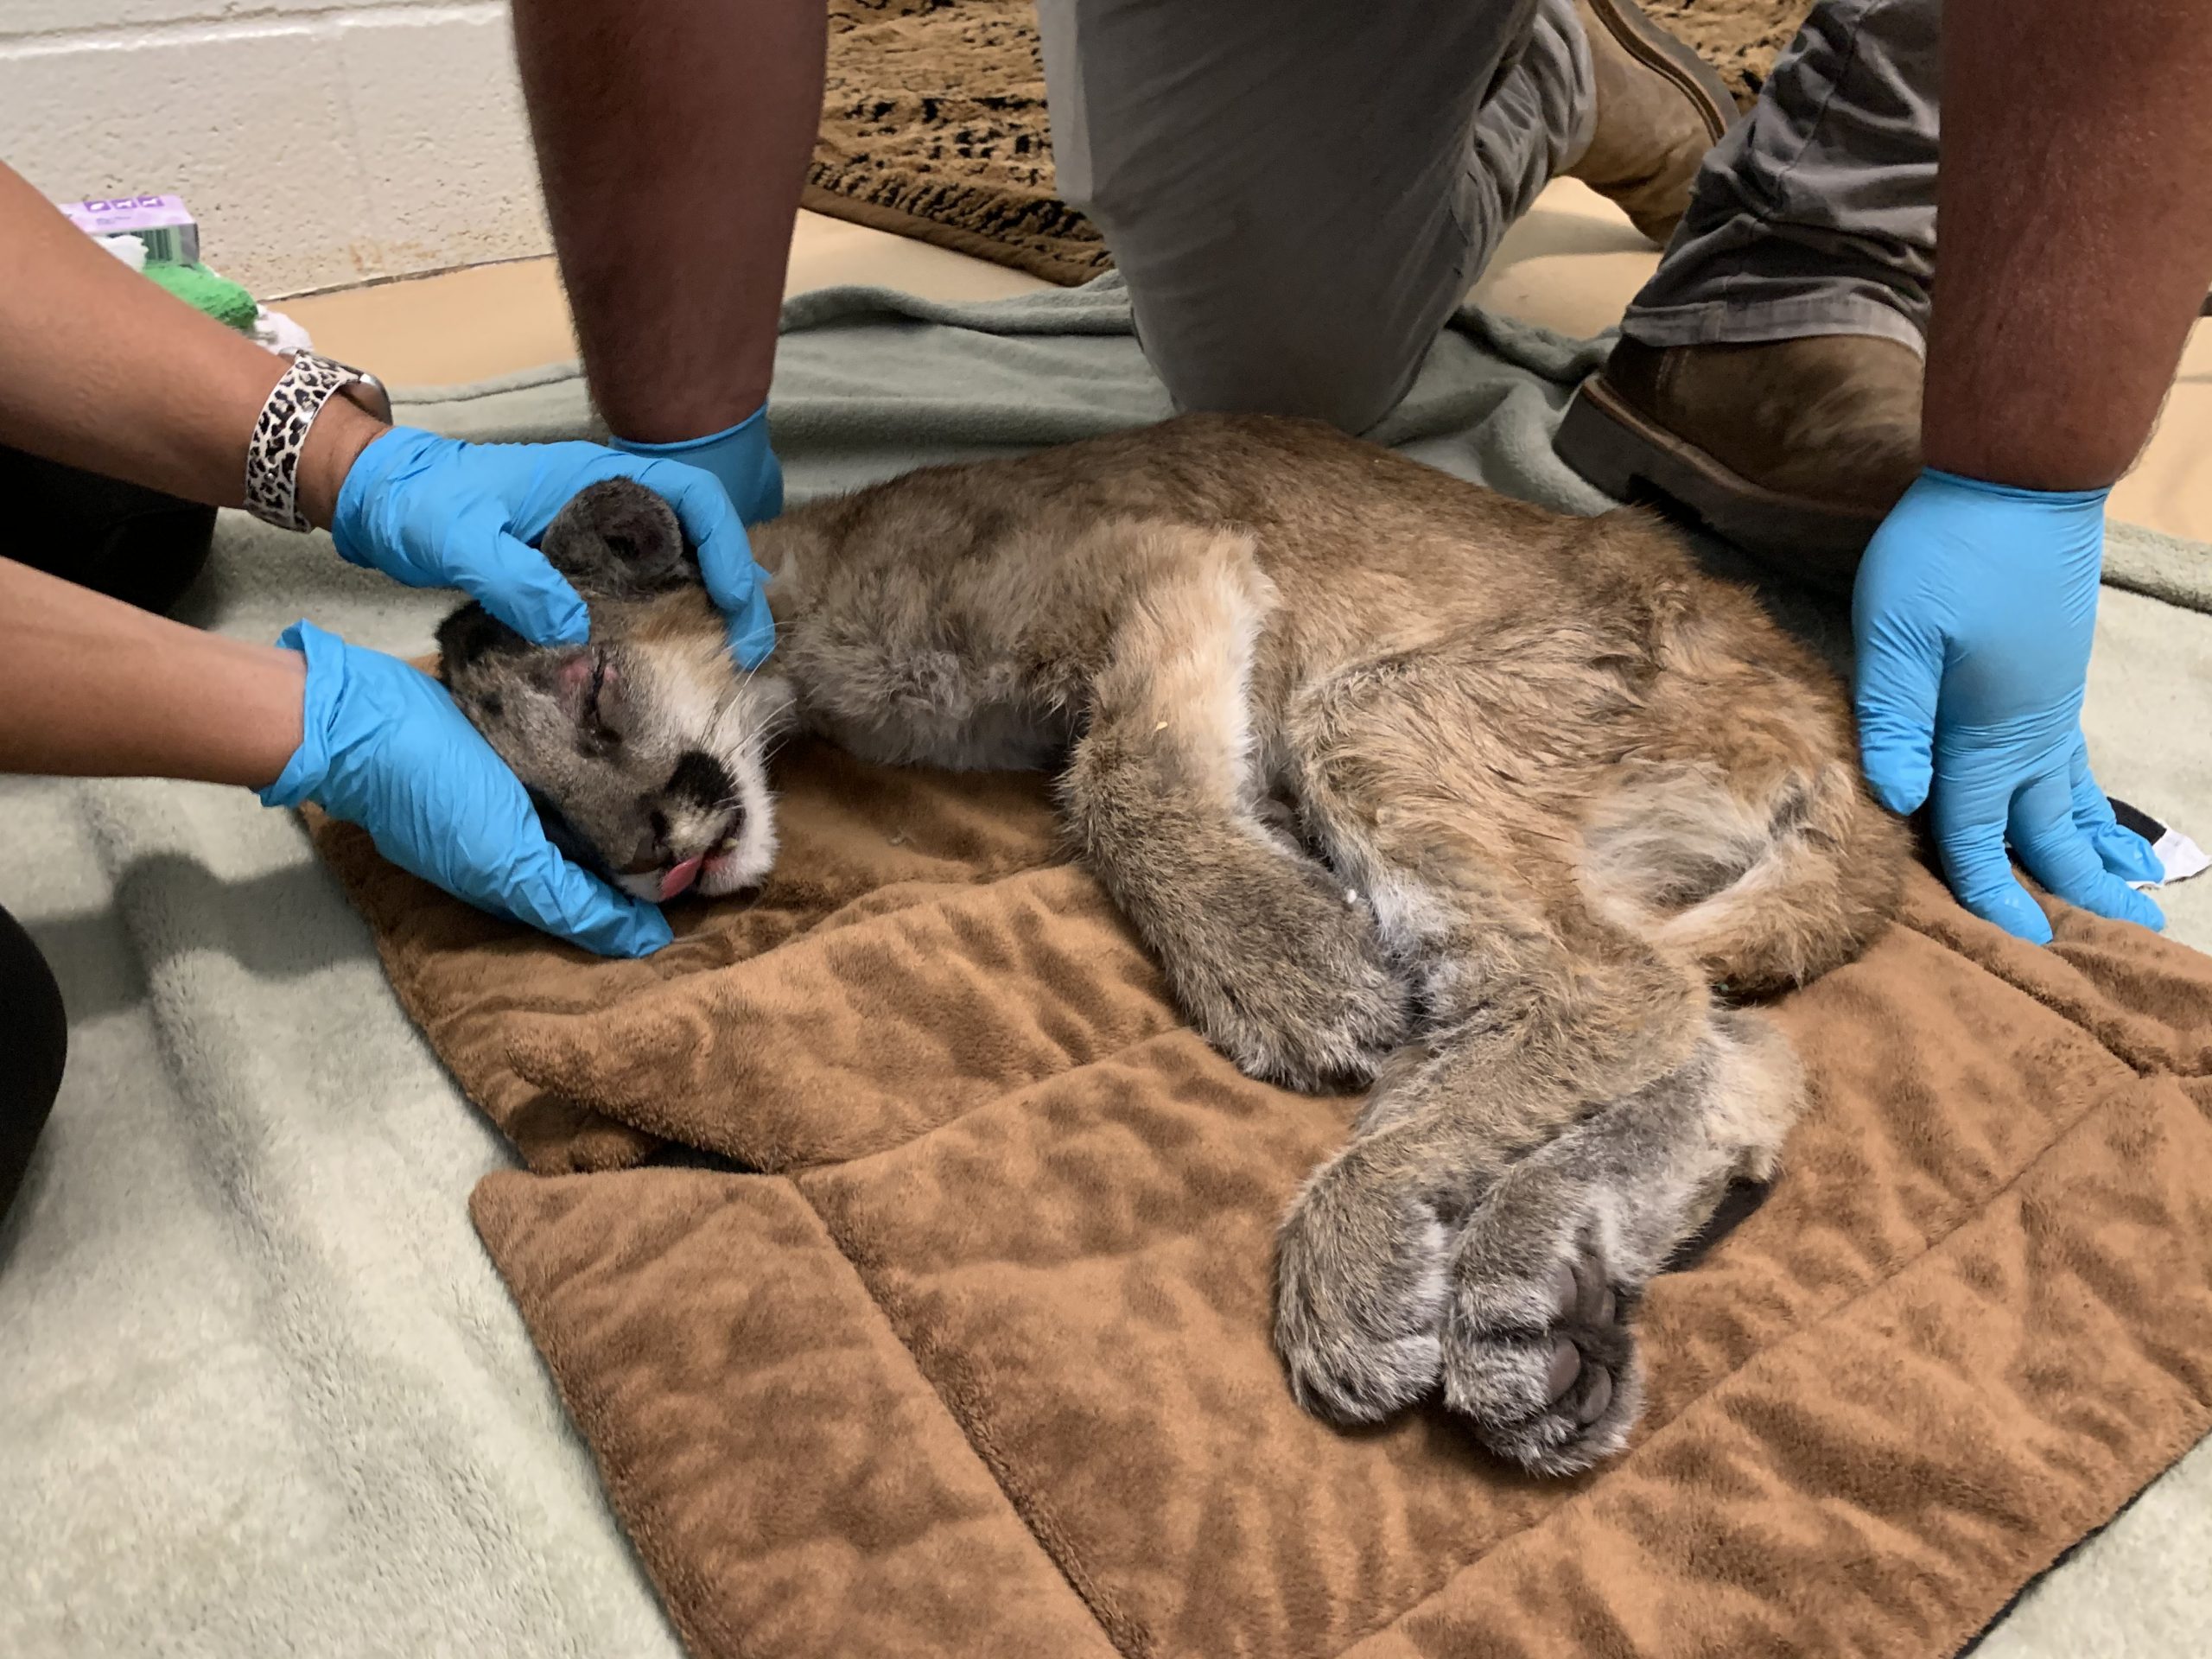 A 14-Week-Old Mountain Lion Cub Was Rescued From Severe Dehydration & Starvation, Now She is Double Her Previous Weight And Full of Life